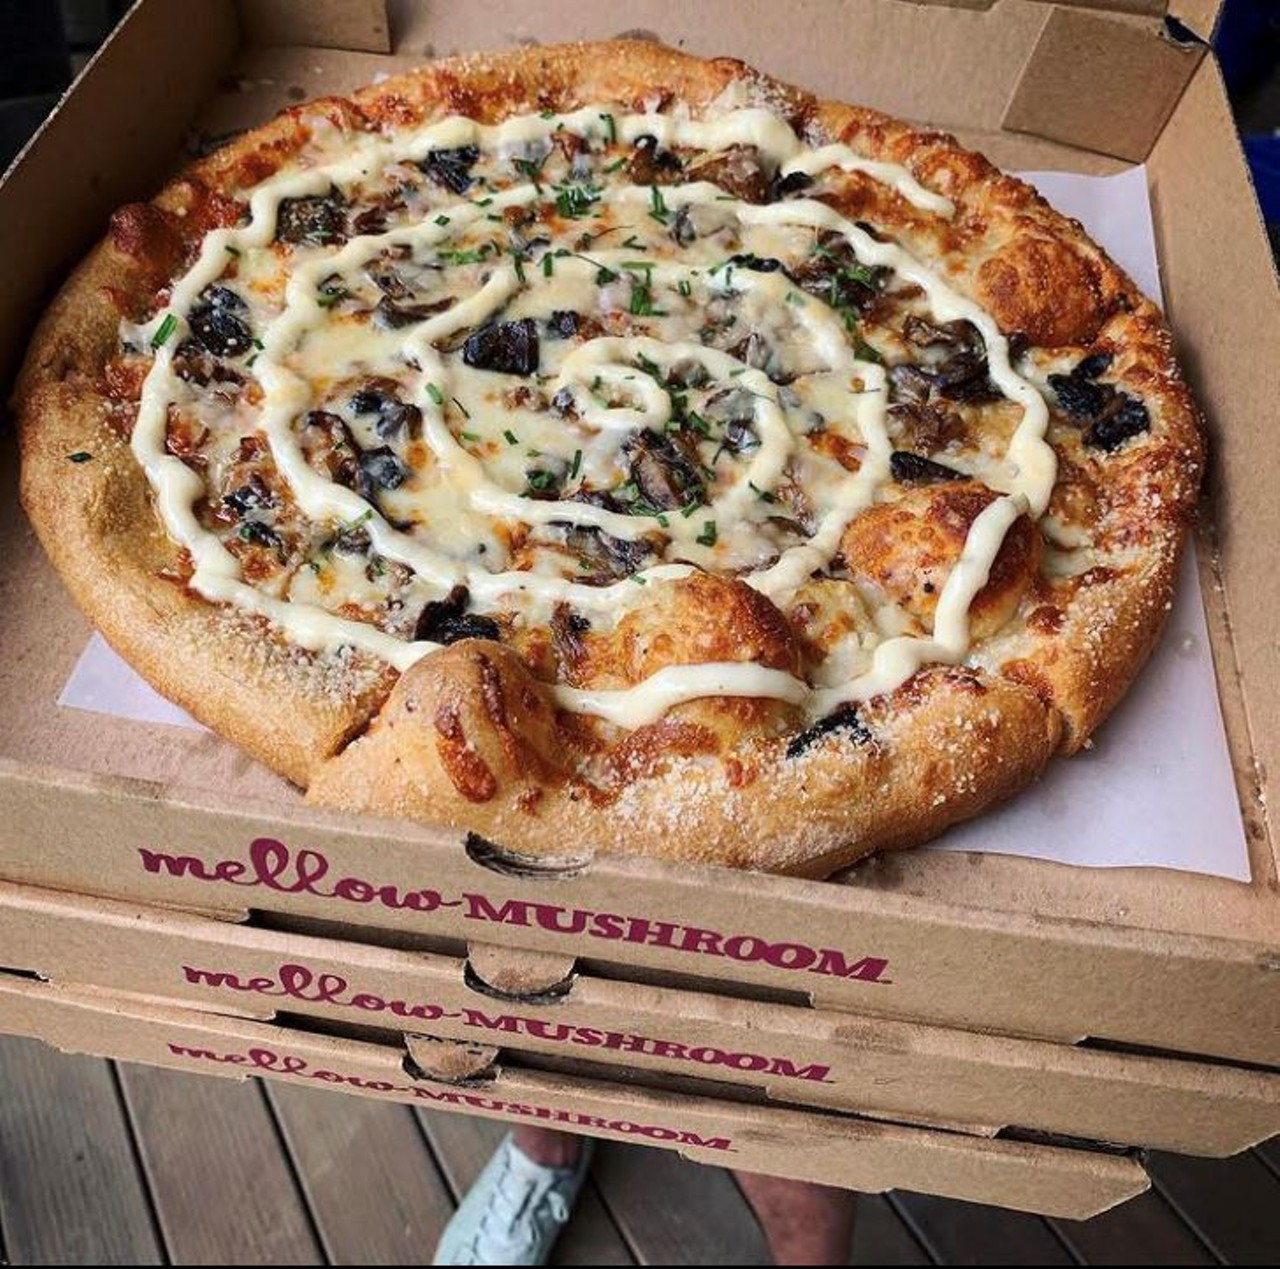 Mellow Mushroom 
Various locations
You can eat at Mellow Mushroom and rest assured that every pizza will be made with the best quality ingredients in order to meet their &#147;higher order of pizza&#148; philosophy. 
Photo via Mellow Mushroom/Instagram